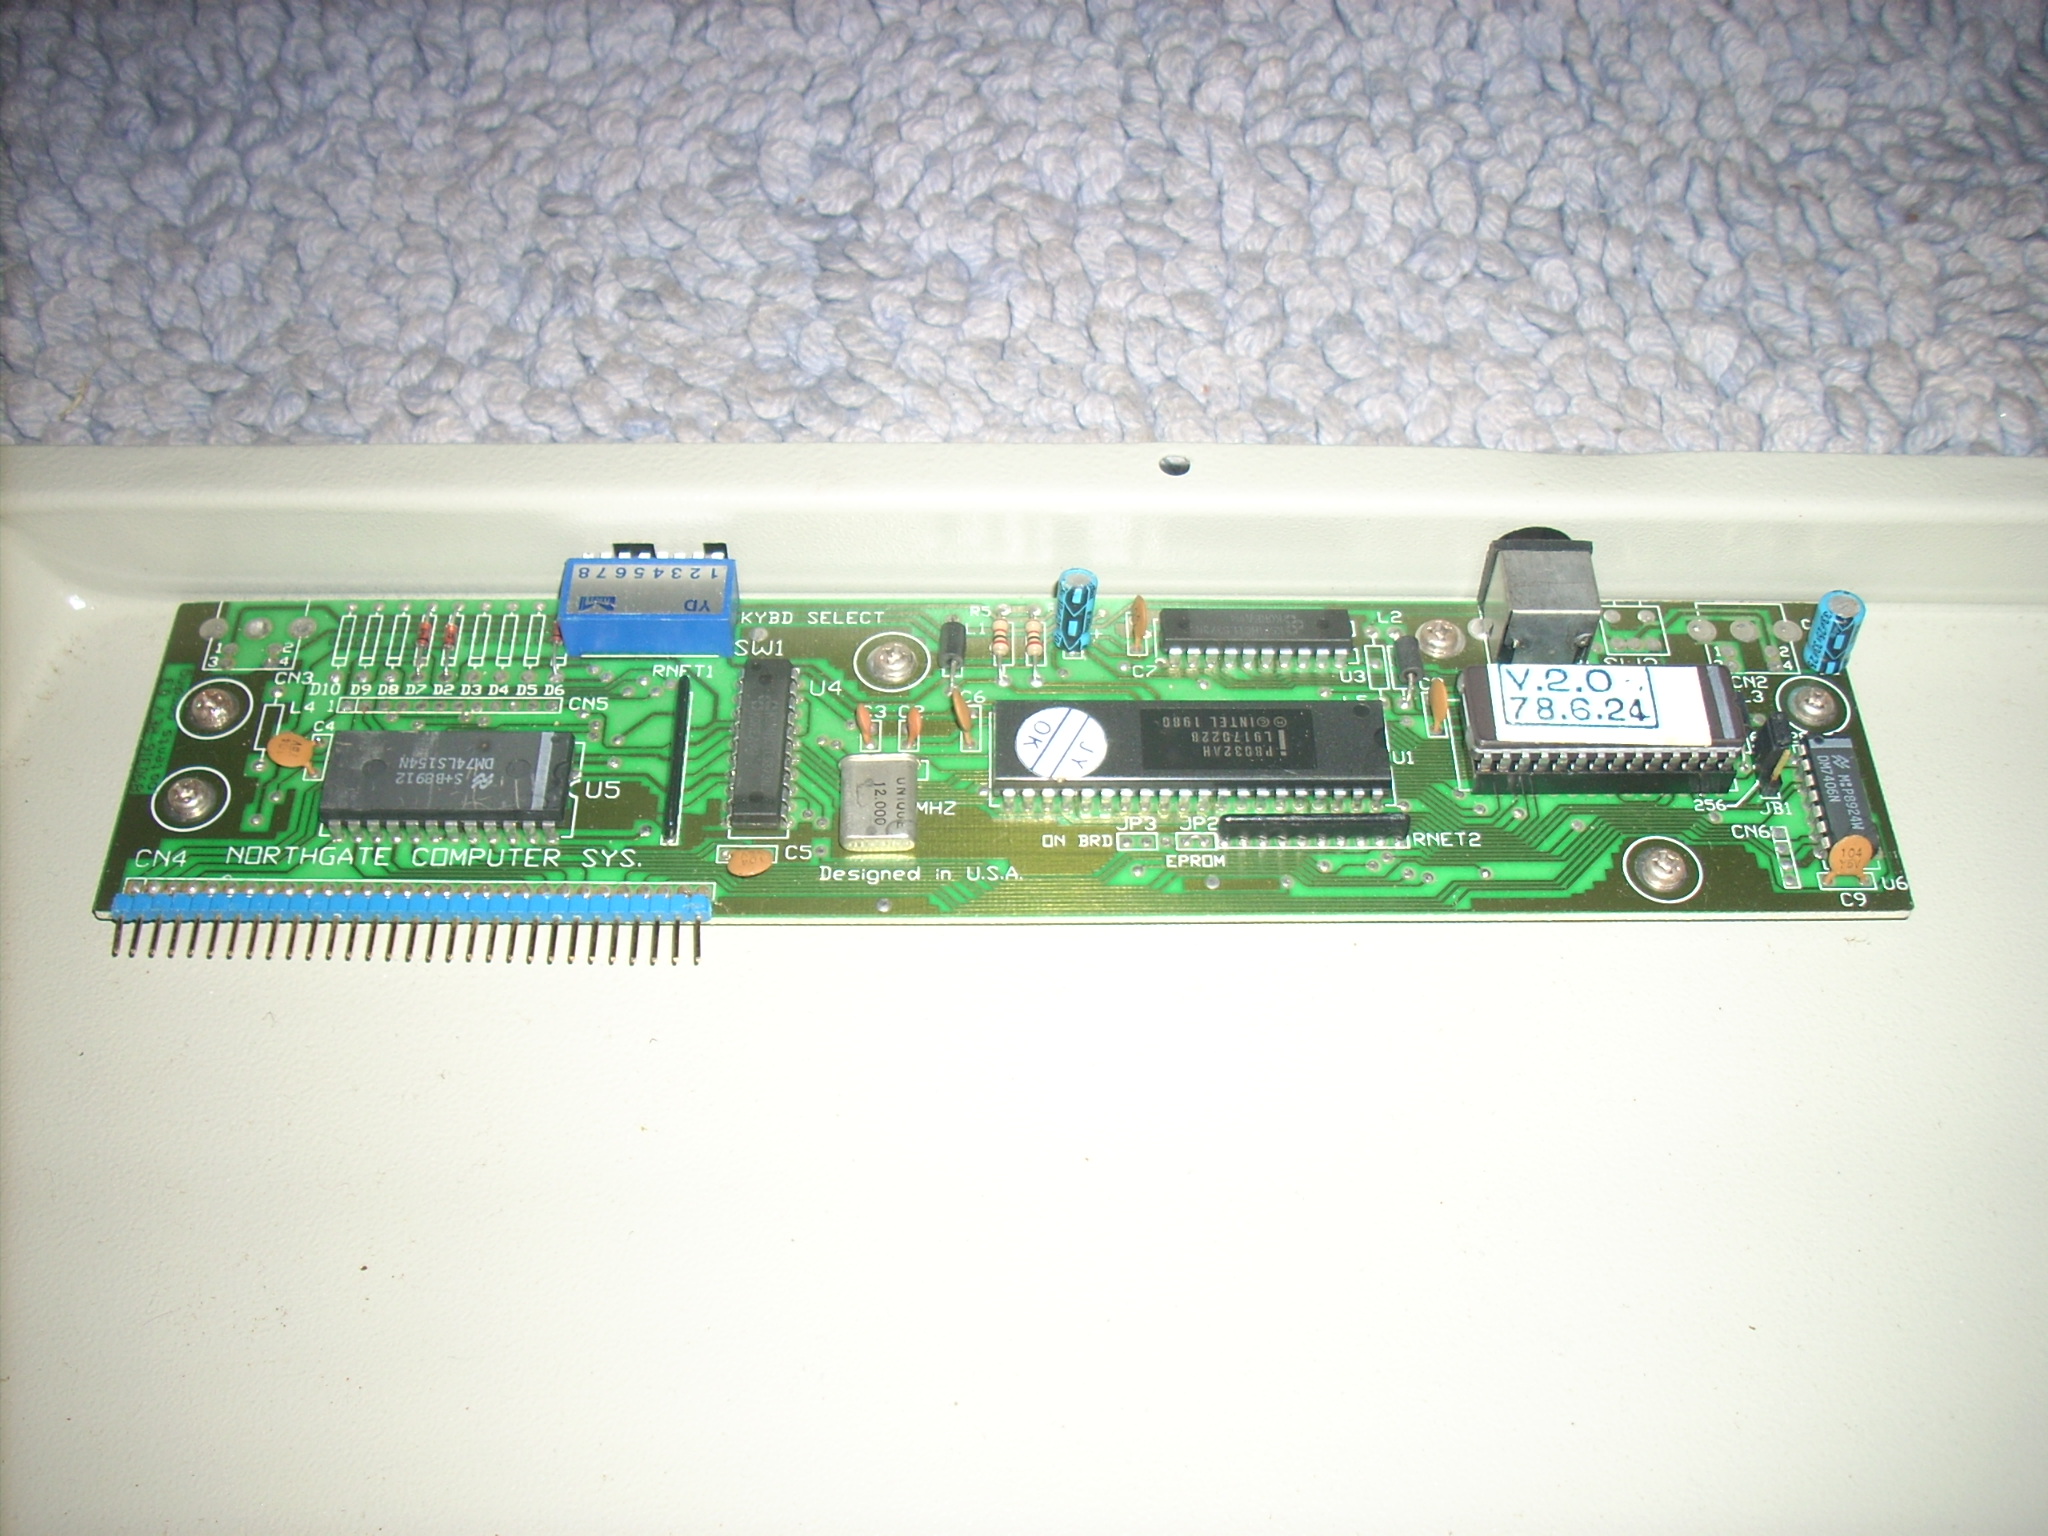 Gen2 connector and dip switch PC board.